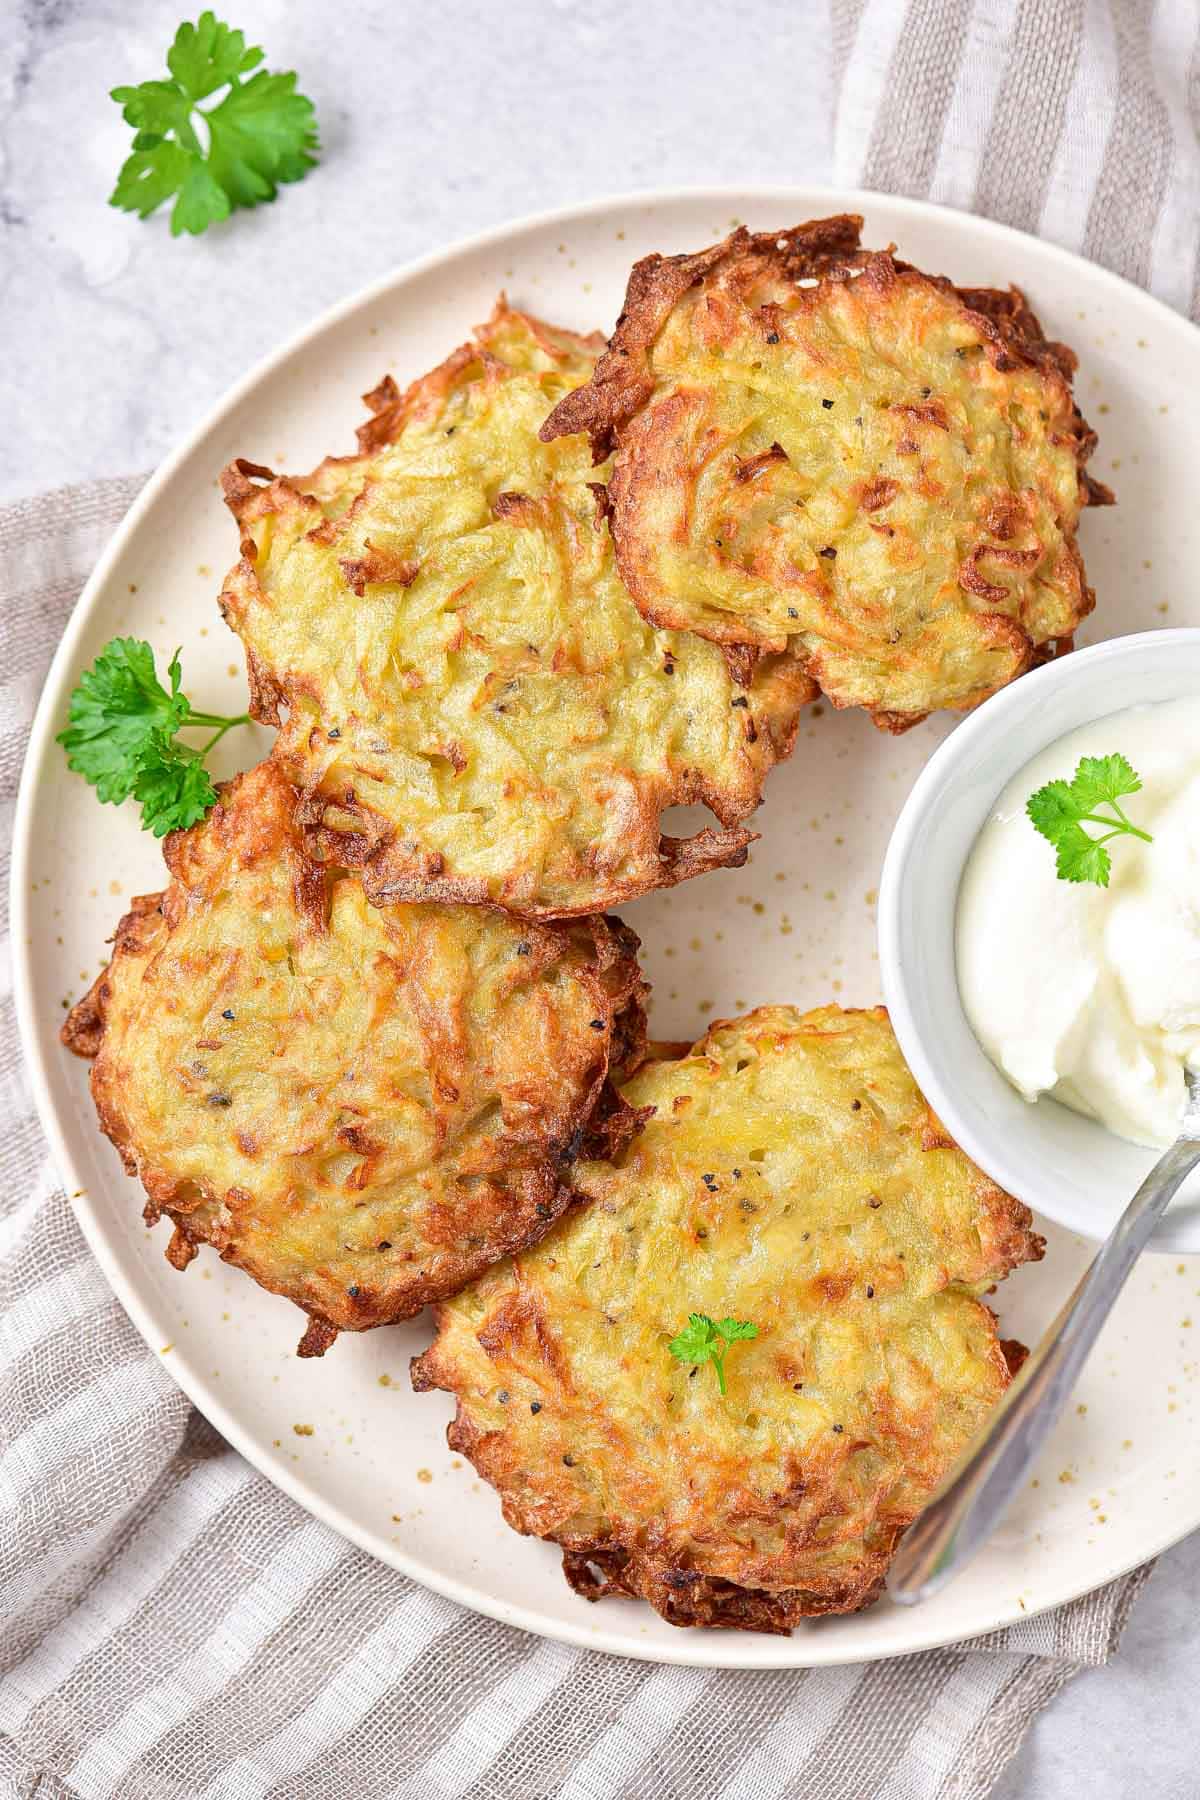 round crispy potato pancakes arranged on plate with smaller dish full of sour cream.